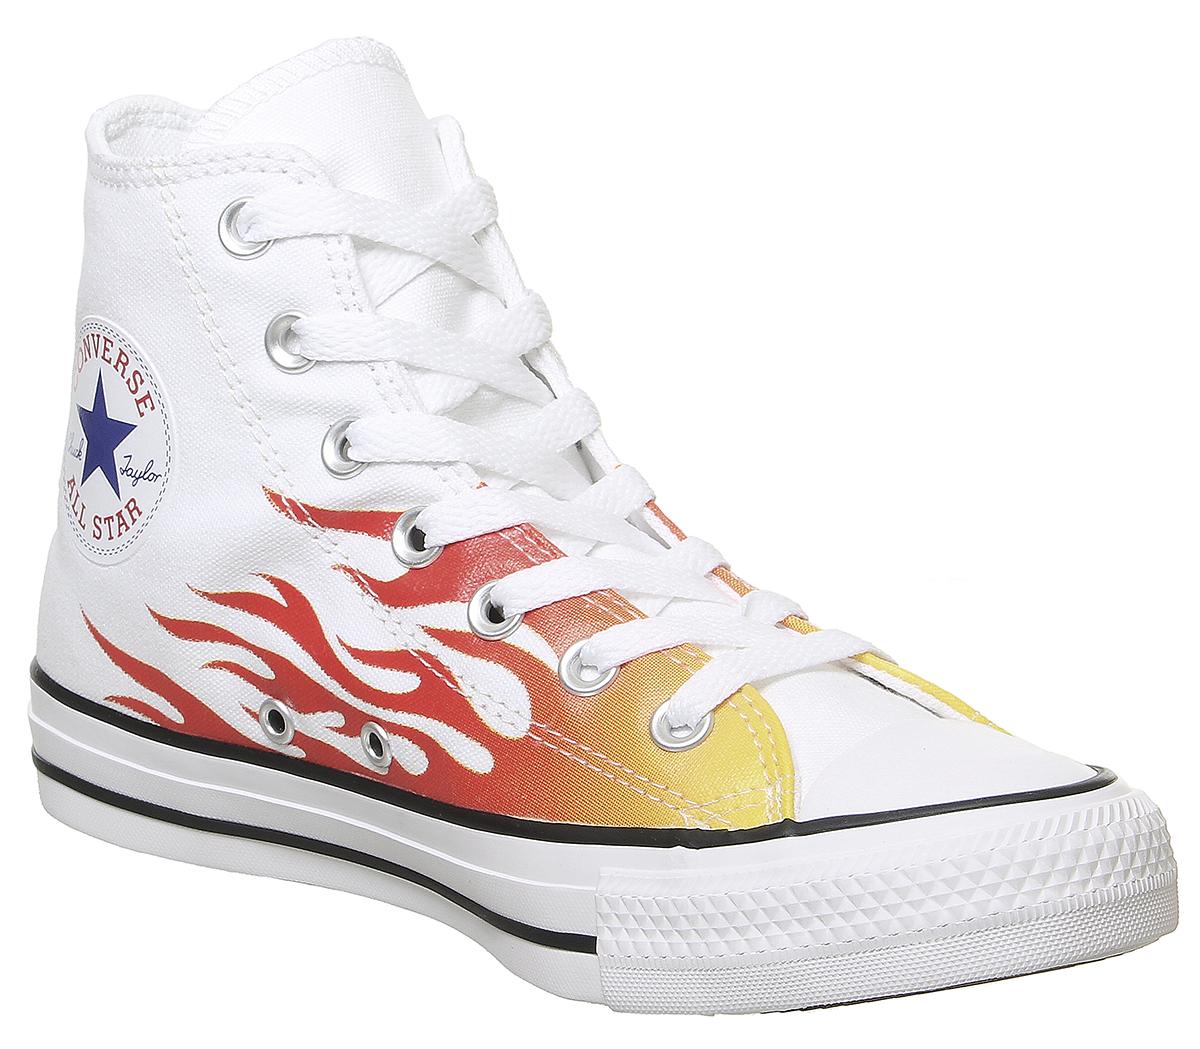 ConverseConverse All Star Hi TrainersWhite Red Fresh Yellow Flame